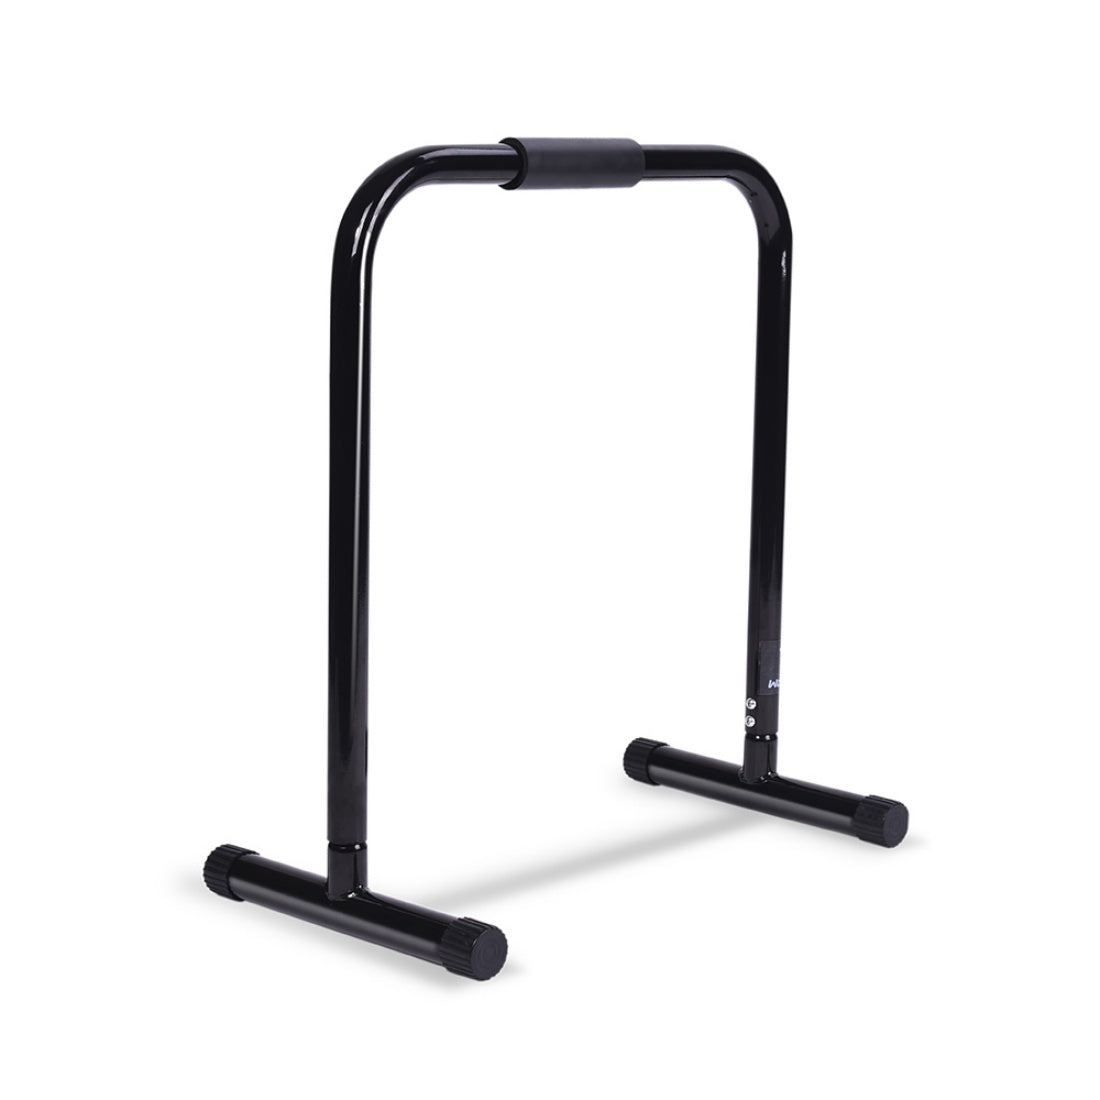 Parallette Stand Parallel Bars Chin Push Equaliser Cross Training Strength Gym